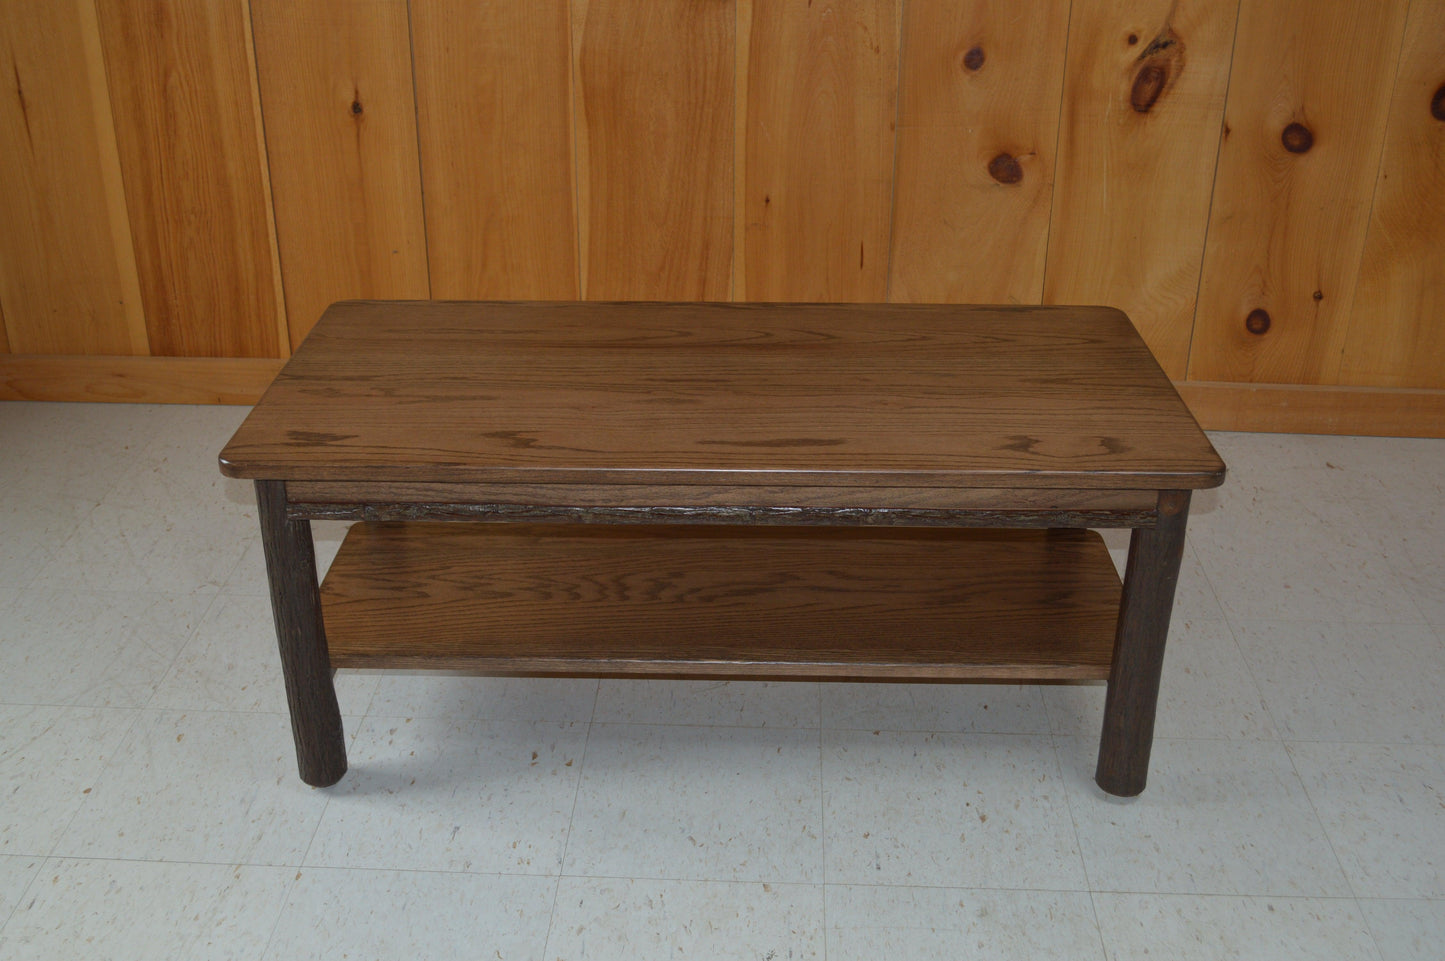 A&L Furniture Co. Hickory Solid Wood Coffee Table with Shelf - LEAD TIME TO SHIP 10 BUSINESS DAYS